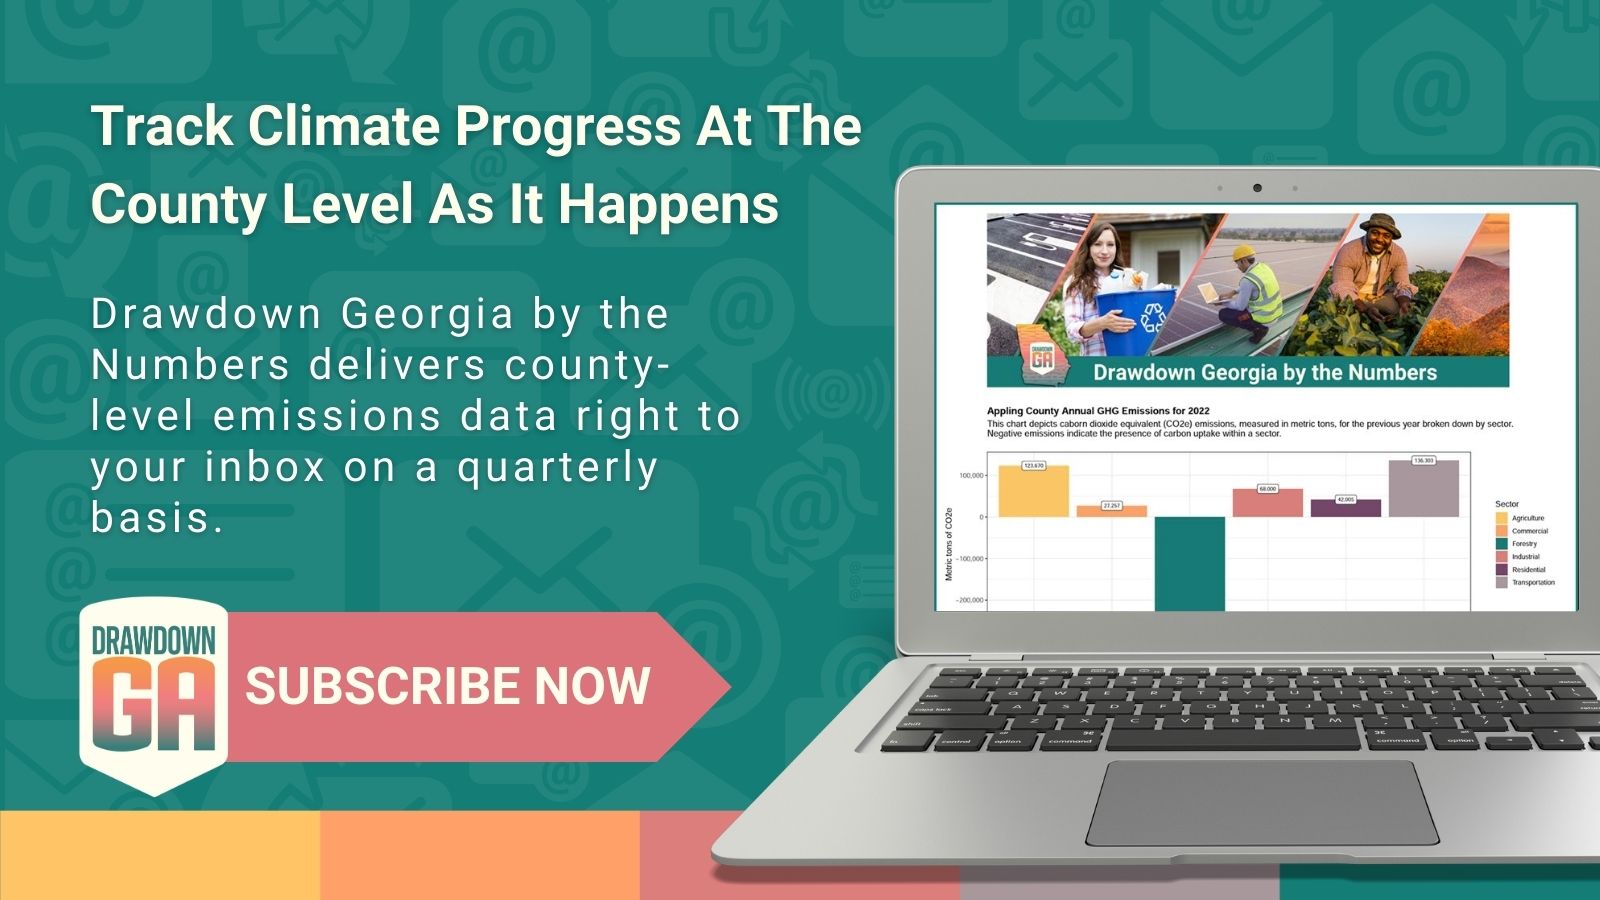 Drawdown Georgia By the Numbers: Local Climate Data at Your Fingertips